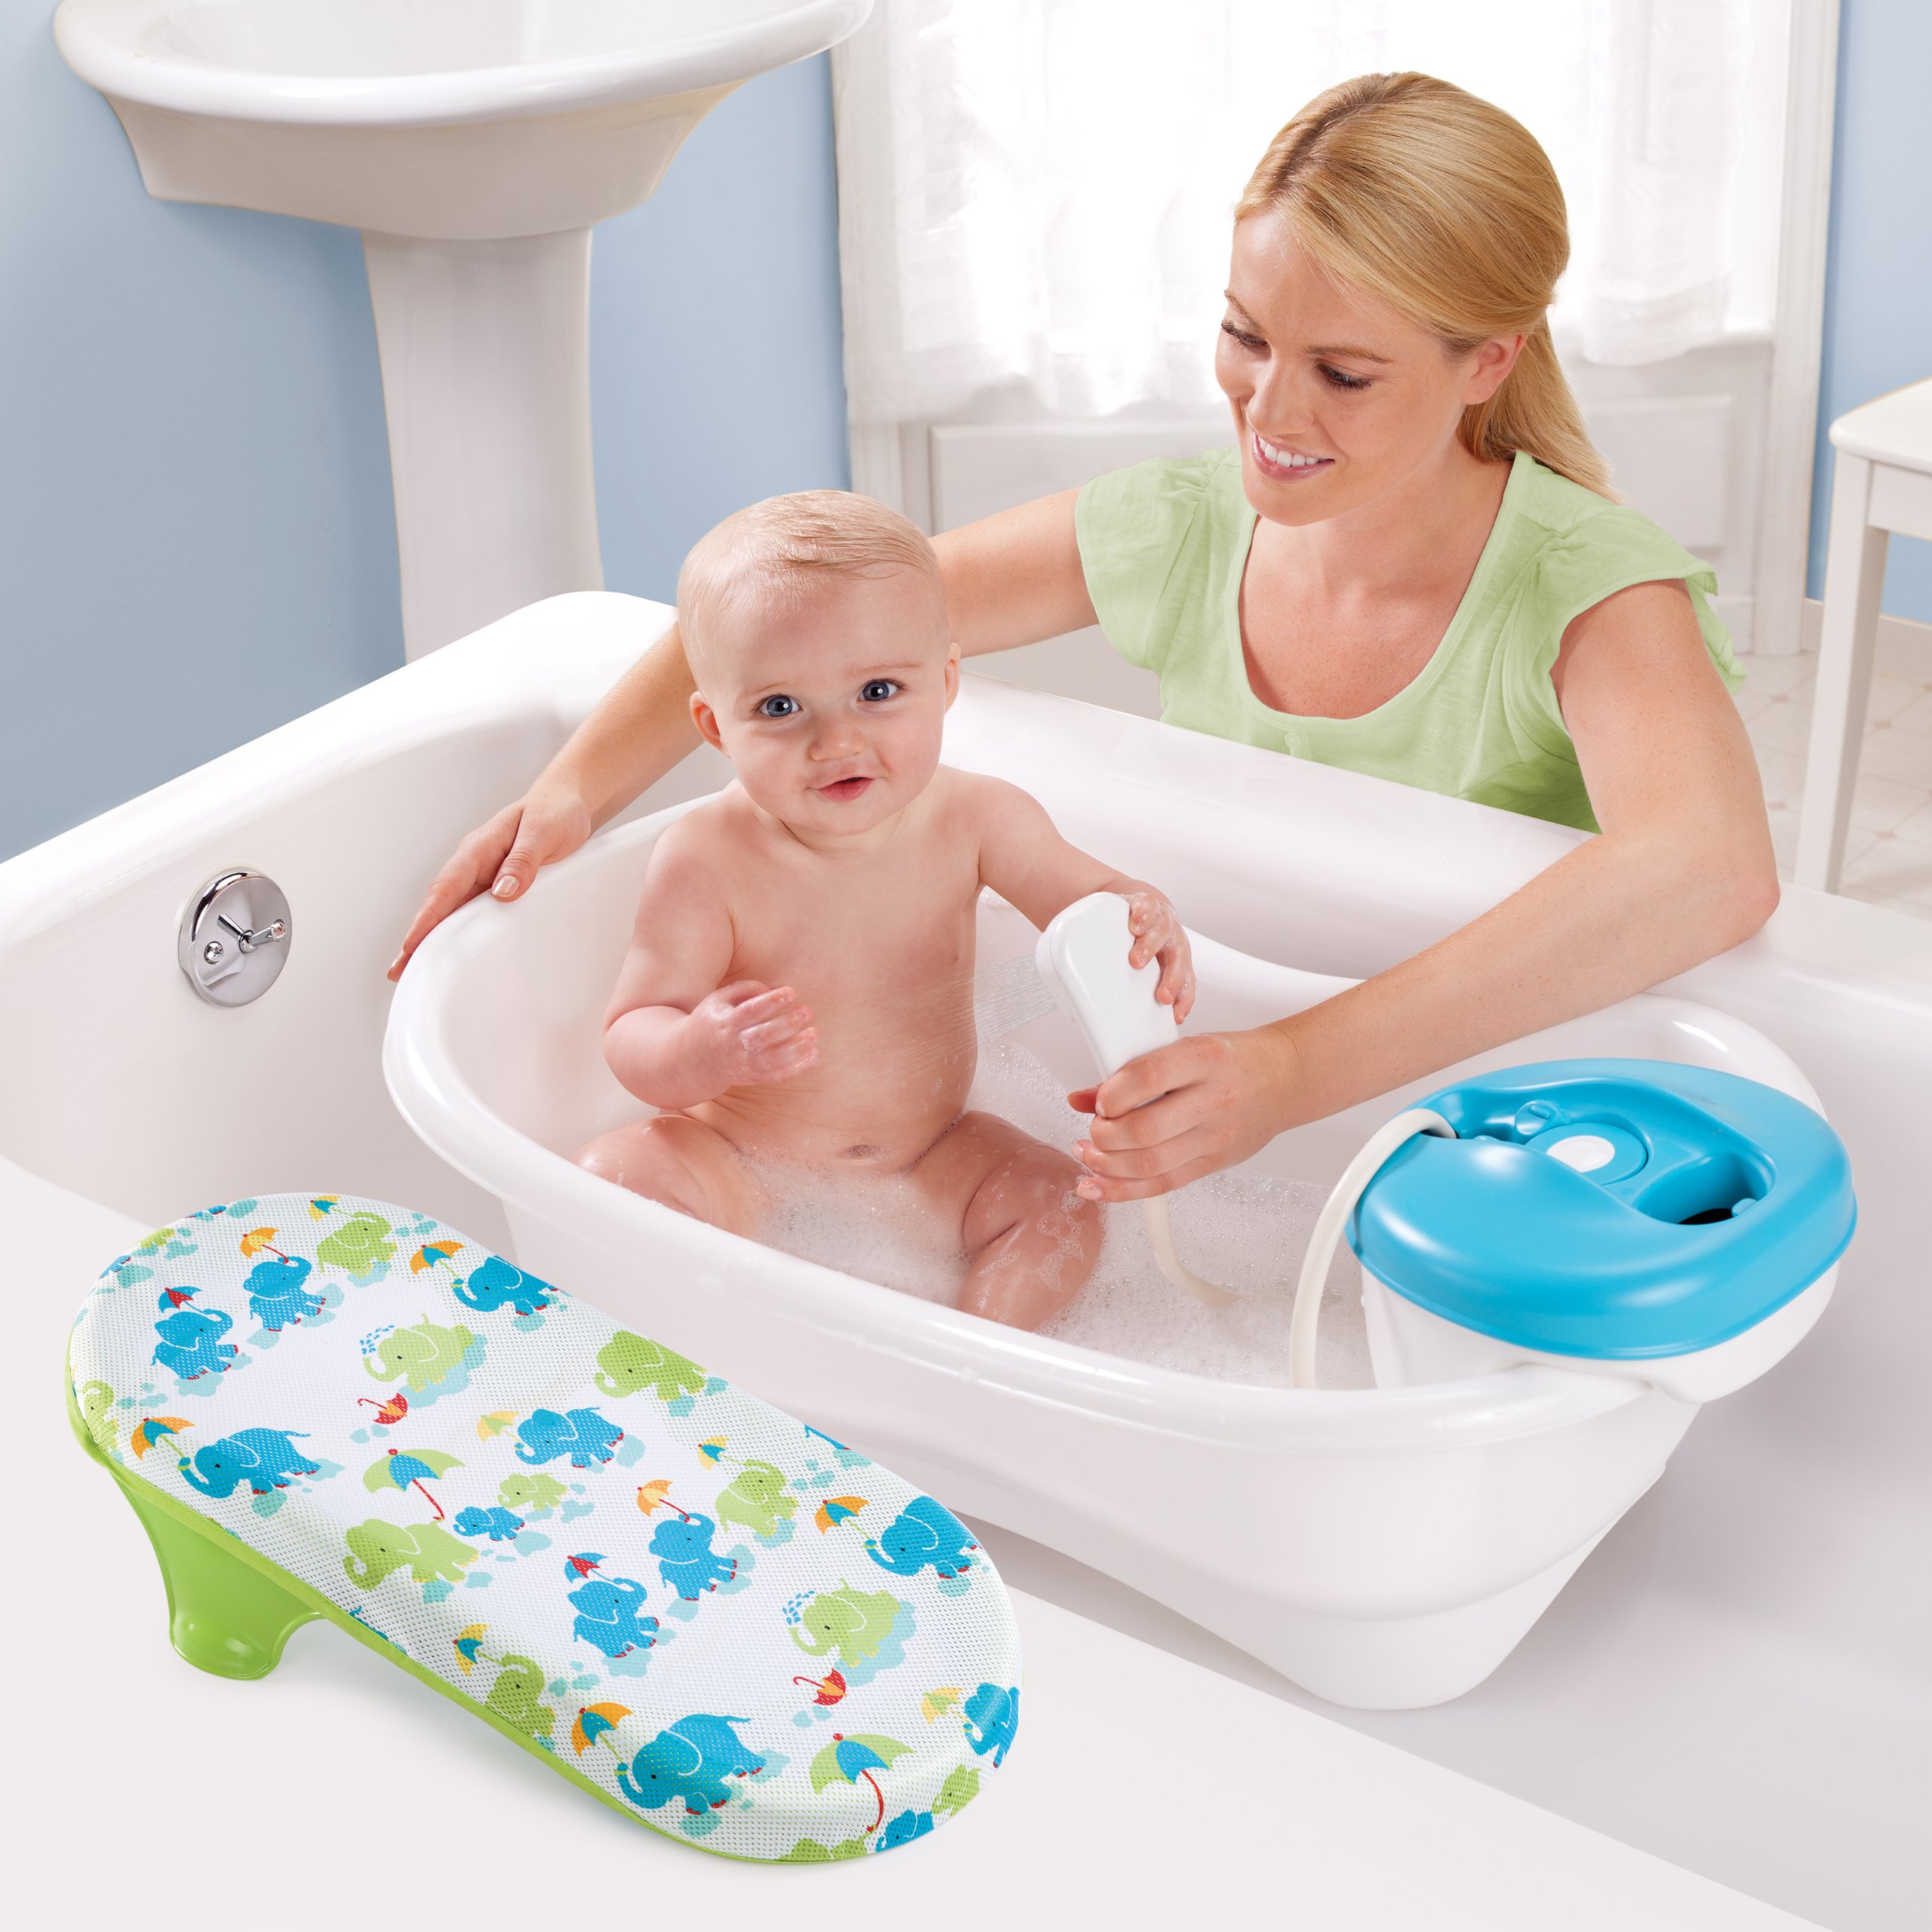 Summer Newborn to Toddler Bath Center and Shower (Neutral) - Bathtub Includes Four Stages that Grow with Your Child